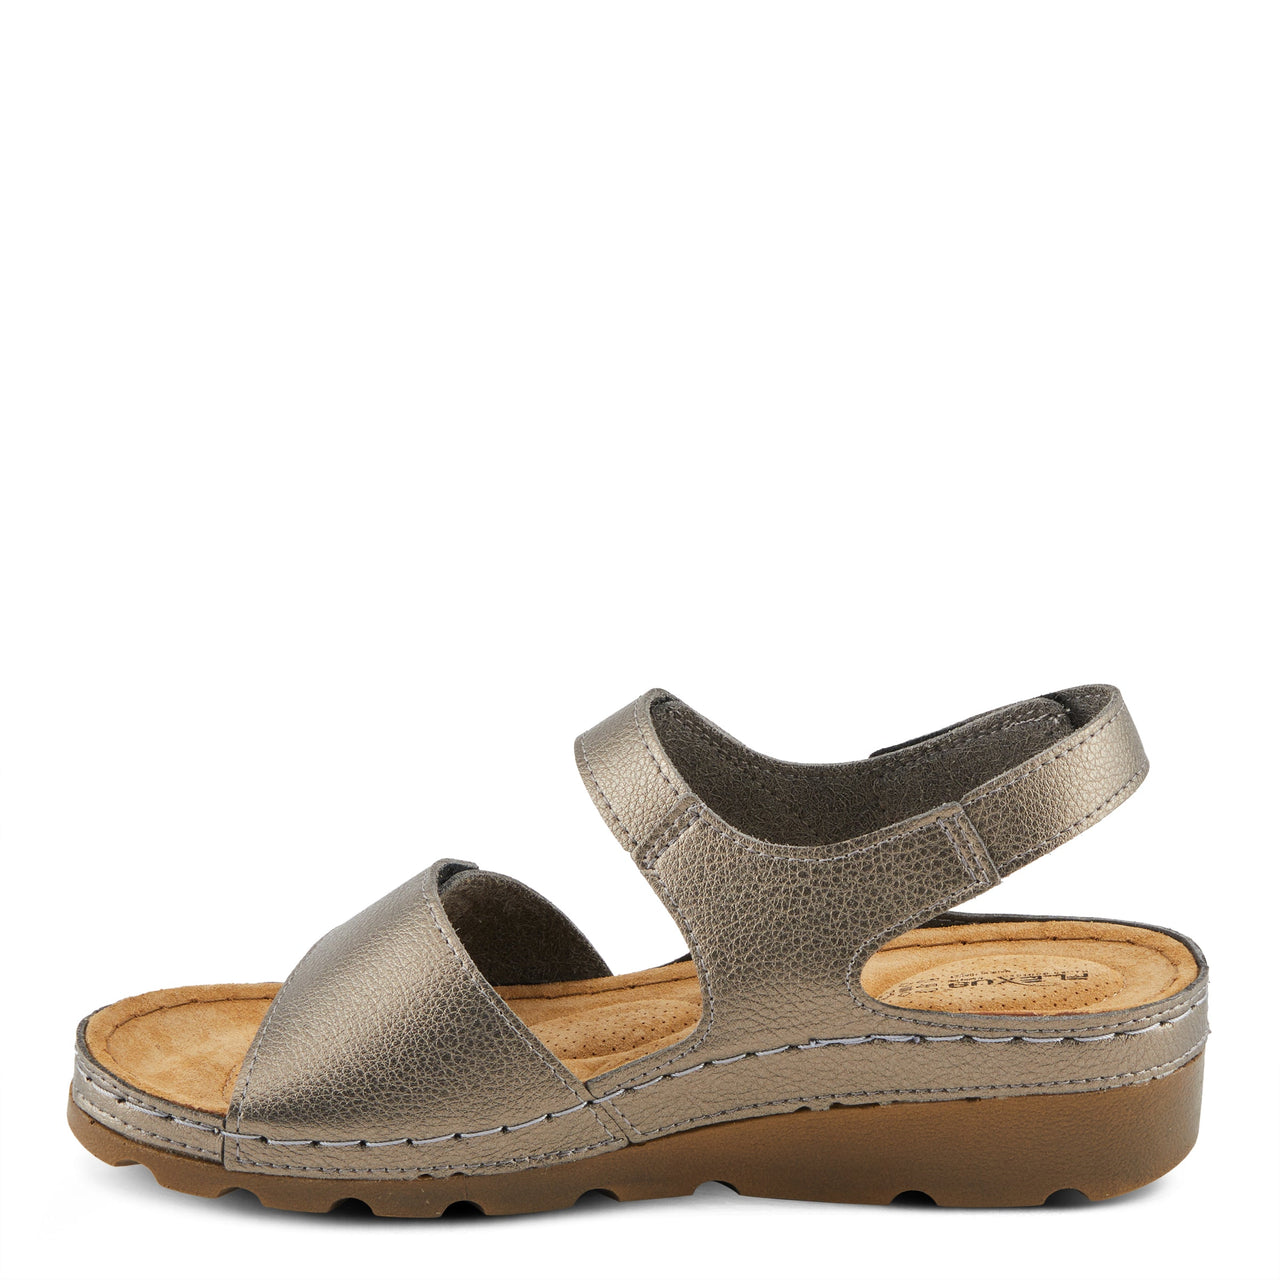 Spring Step Shoes Flexus Ariel Sandals in Bronze leather with slip-resistant outsole